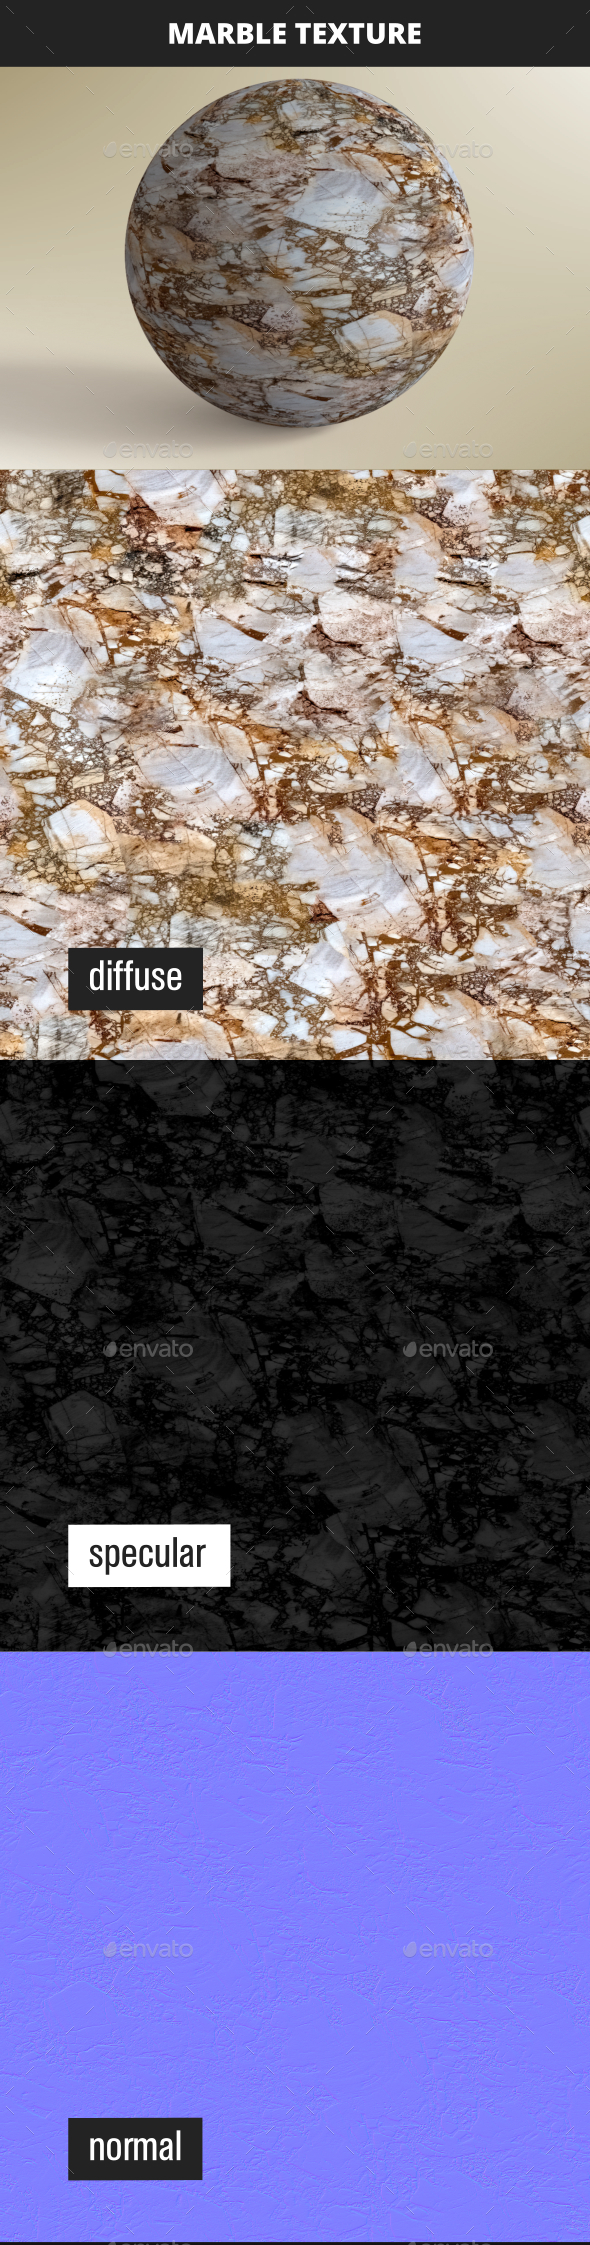 Natural Marble Texture - 3Docean 34468993